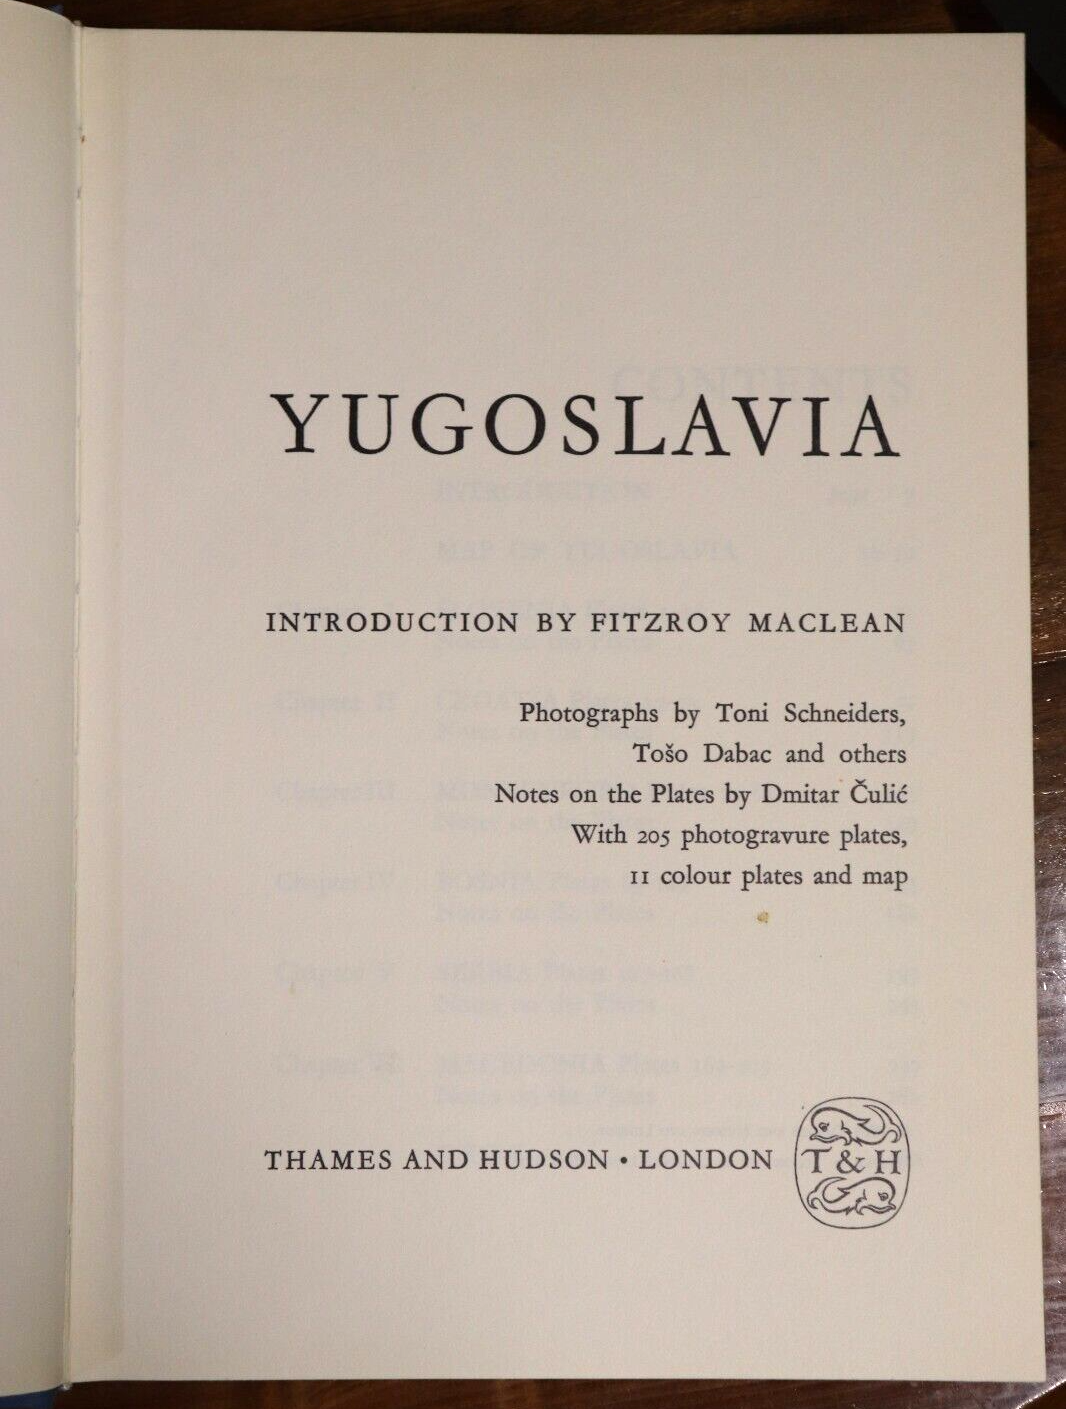 1969 Yugoslavia by Fitzroy Maclean Vintage Architecture & History Book - 0